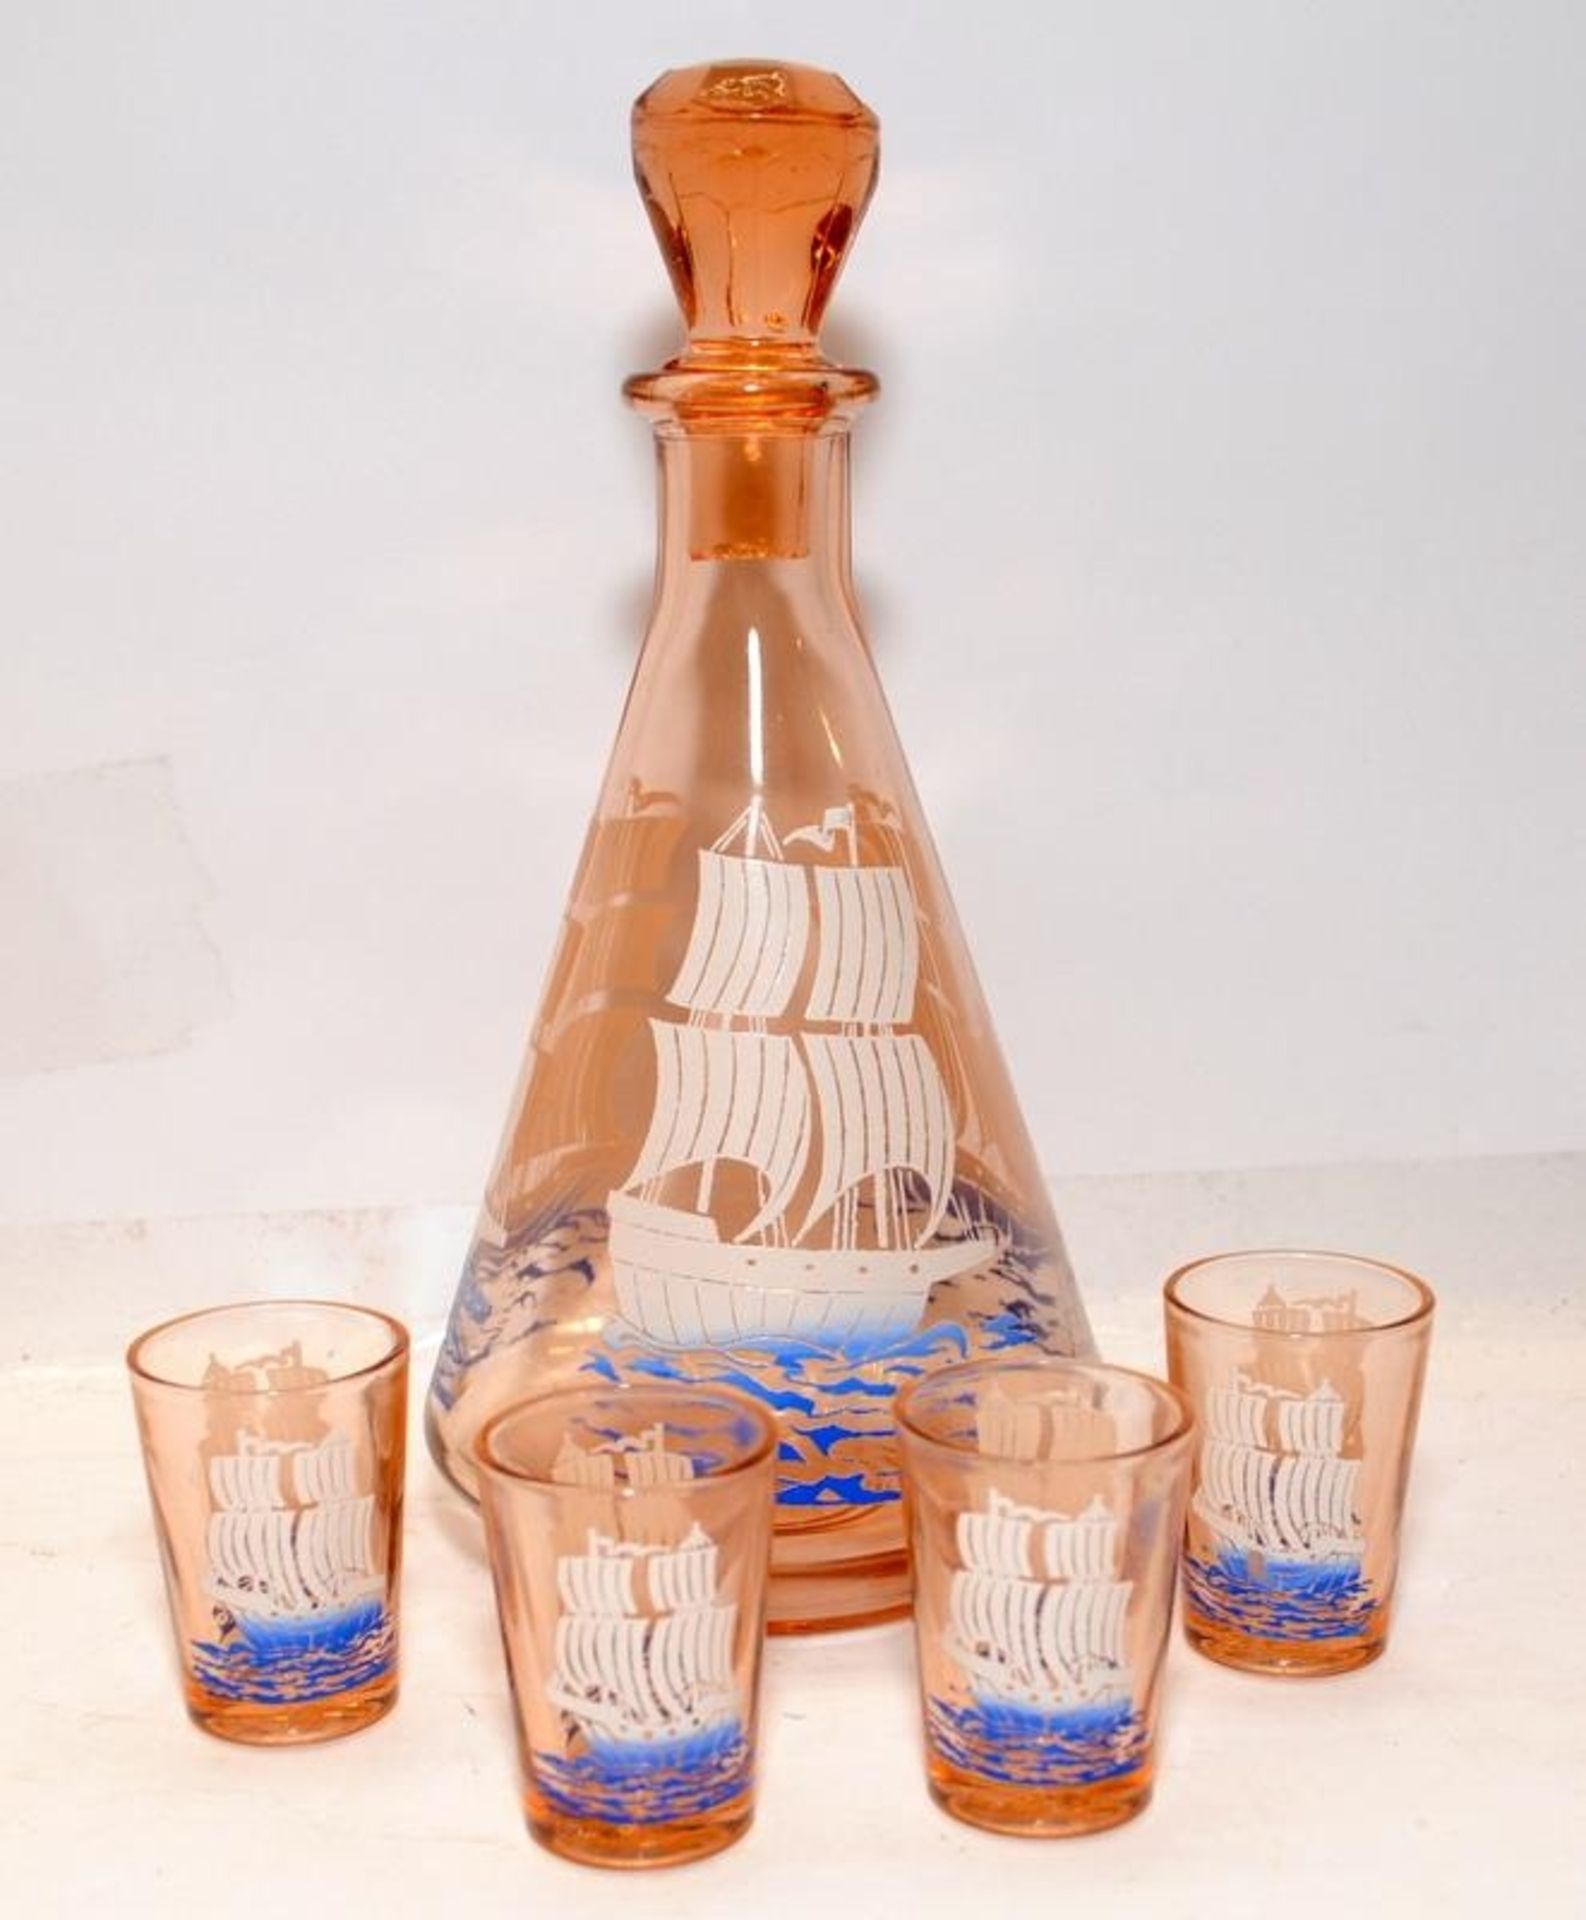 Vintage mid-century peach glass decanter featuring a ship c/w four shot glasses